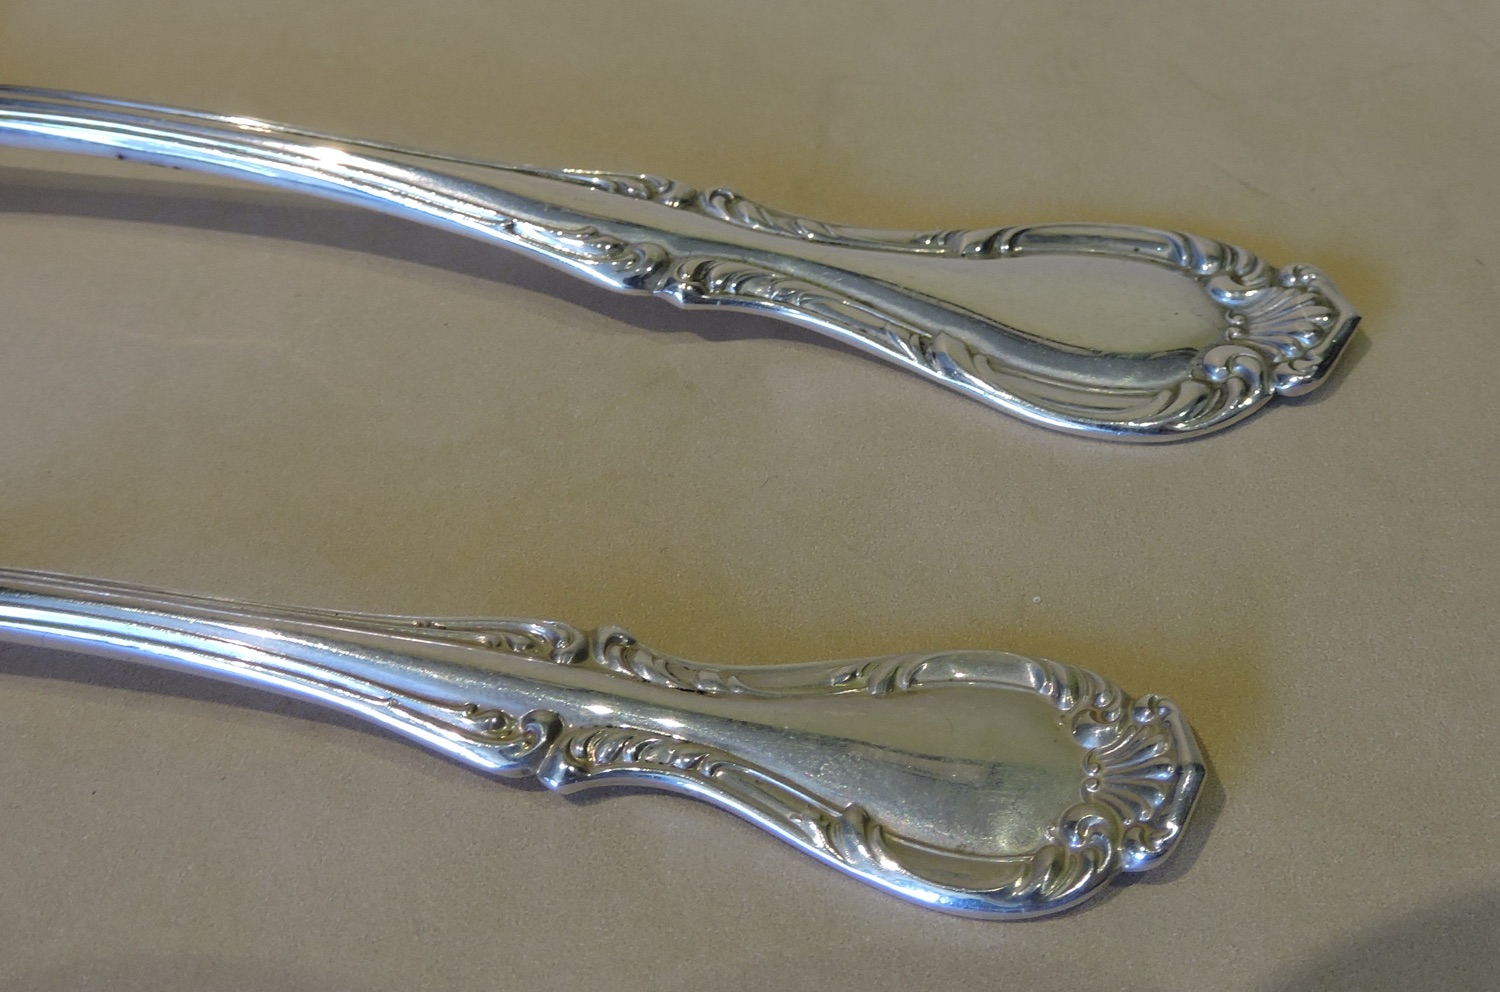 VERY GOOD CONDITION S Details about  / NORTHUMBRIA CELLO STERLING SILVER PLACE FORK